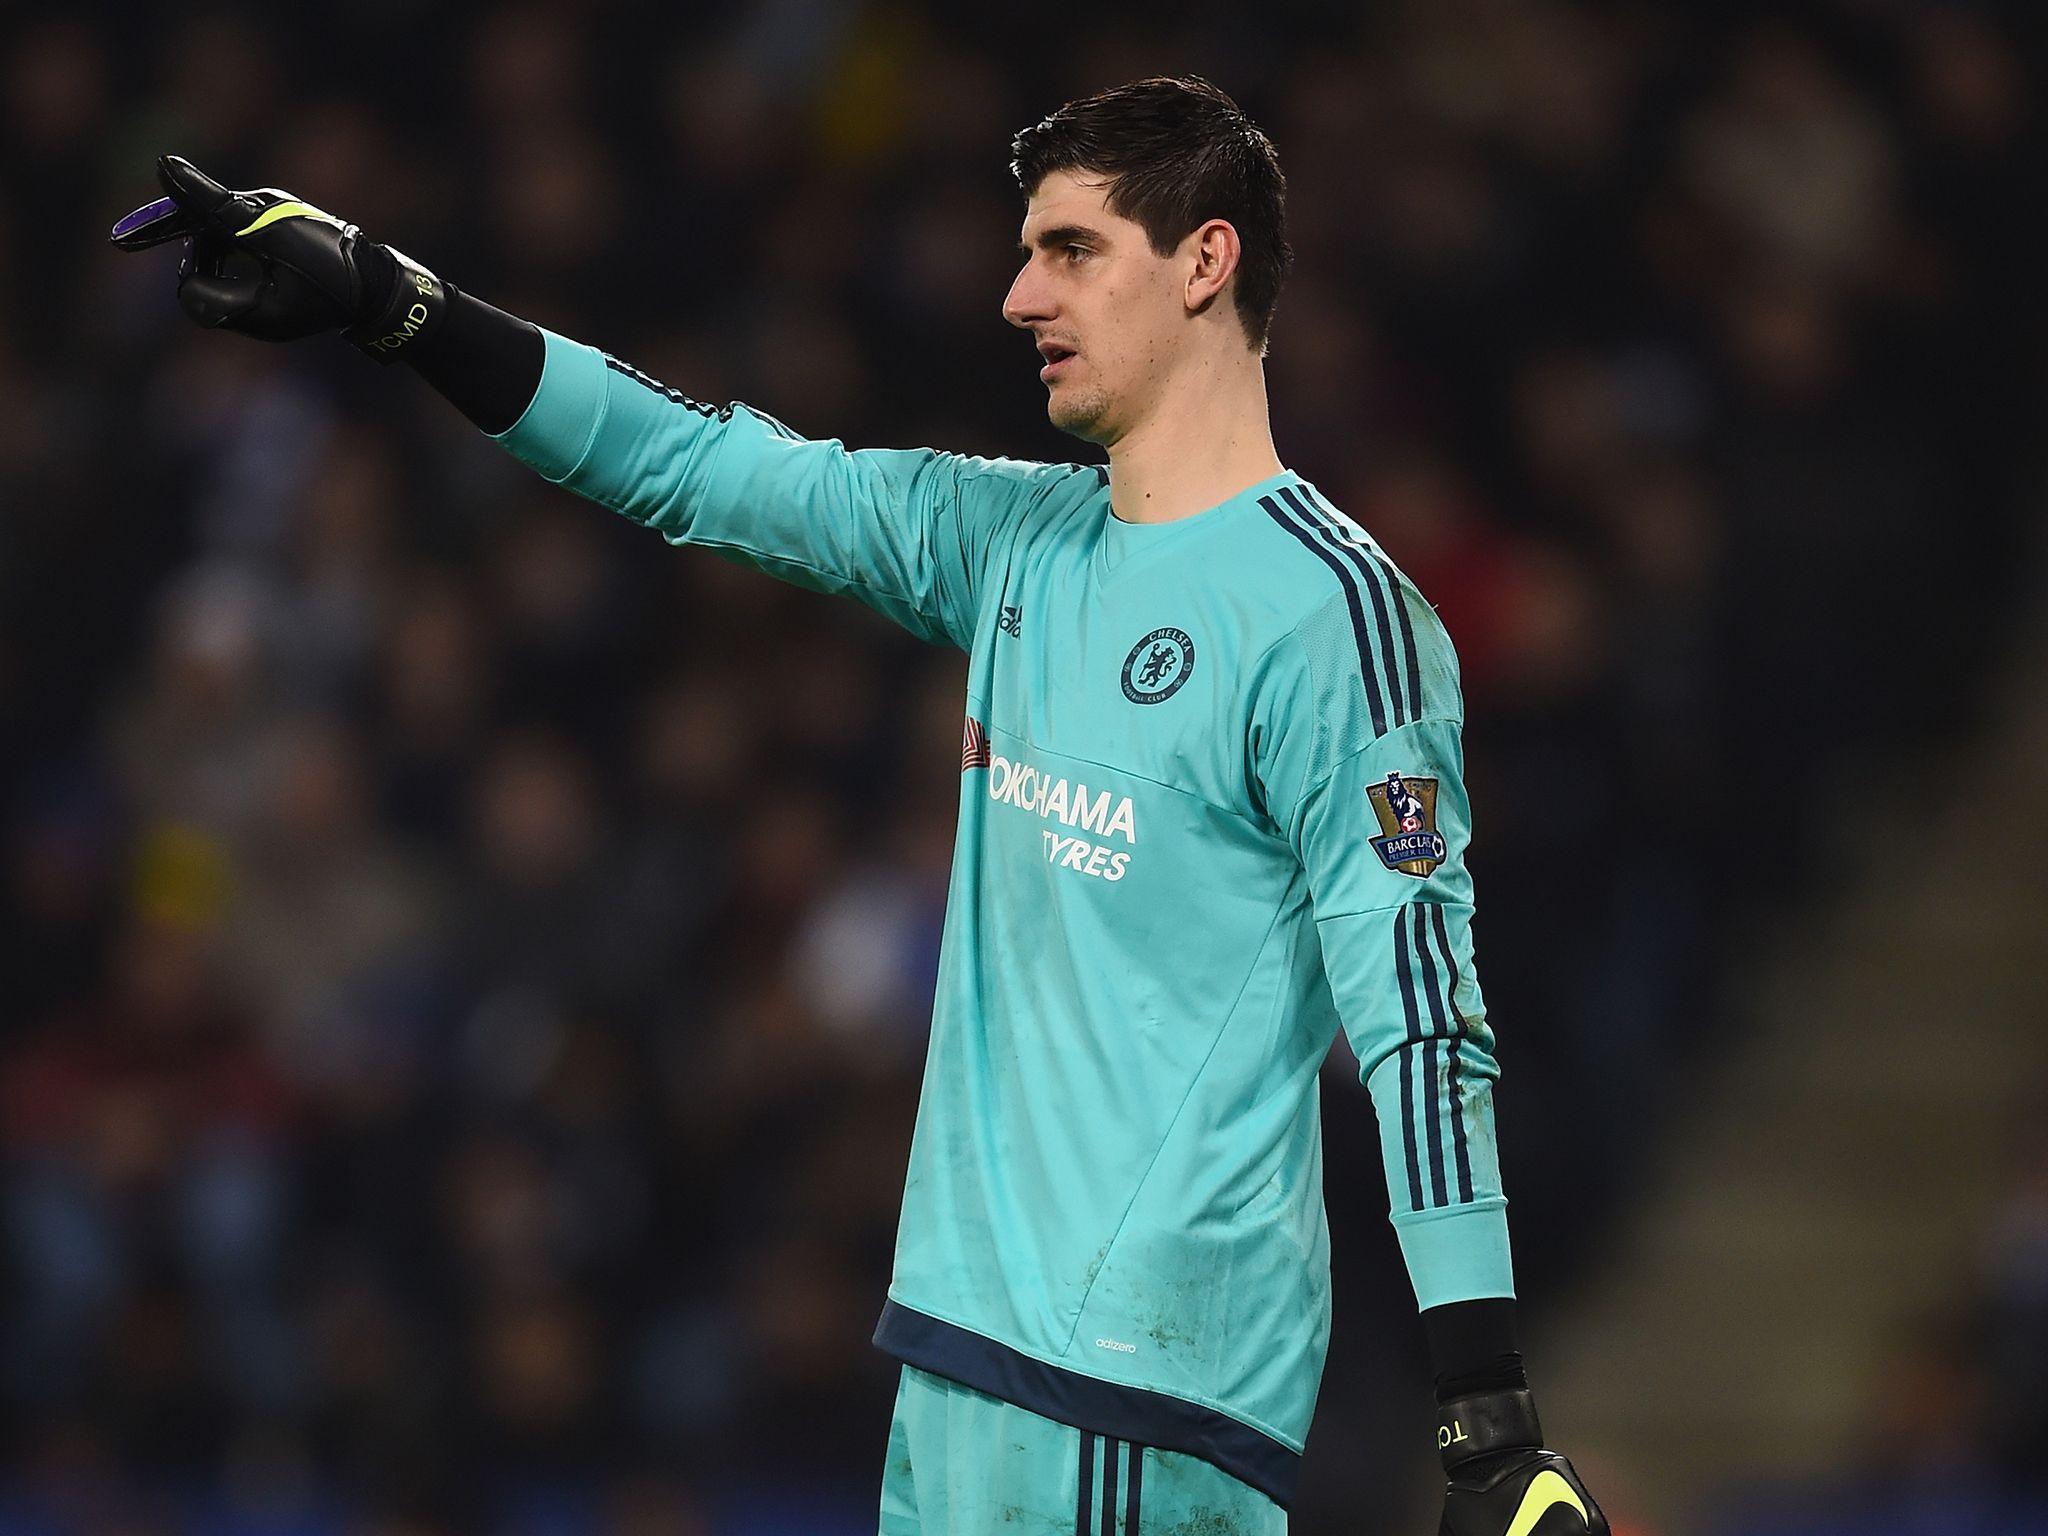 Chelsea's Thibaut Courtois frustrated as Champions League hopes